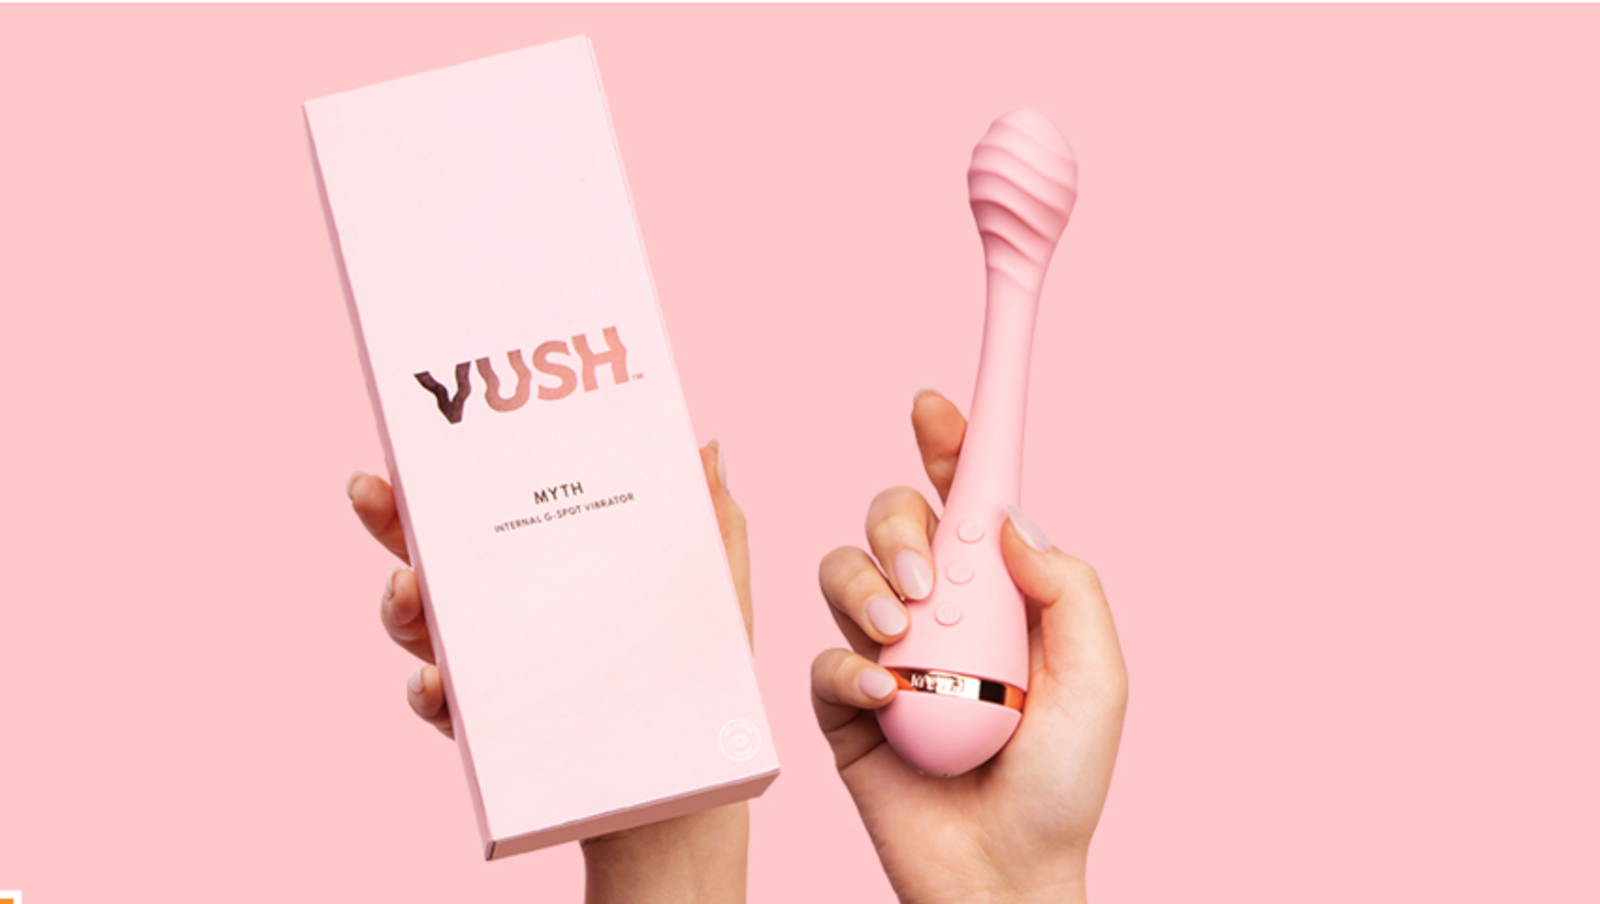 Lion's Den Welcomes Australian Brand VUSH With Launch of The Myth